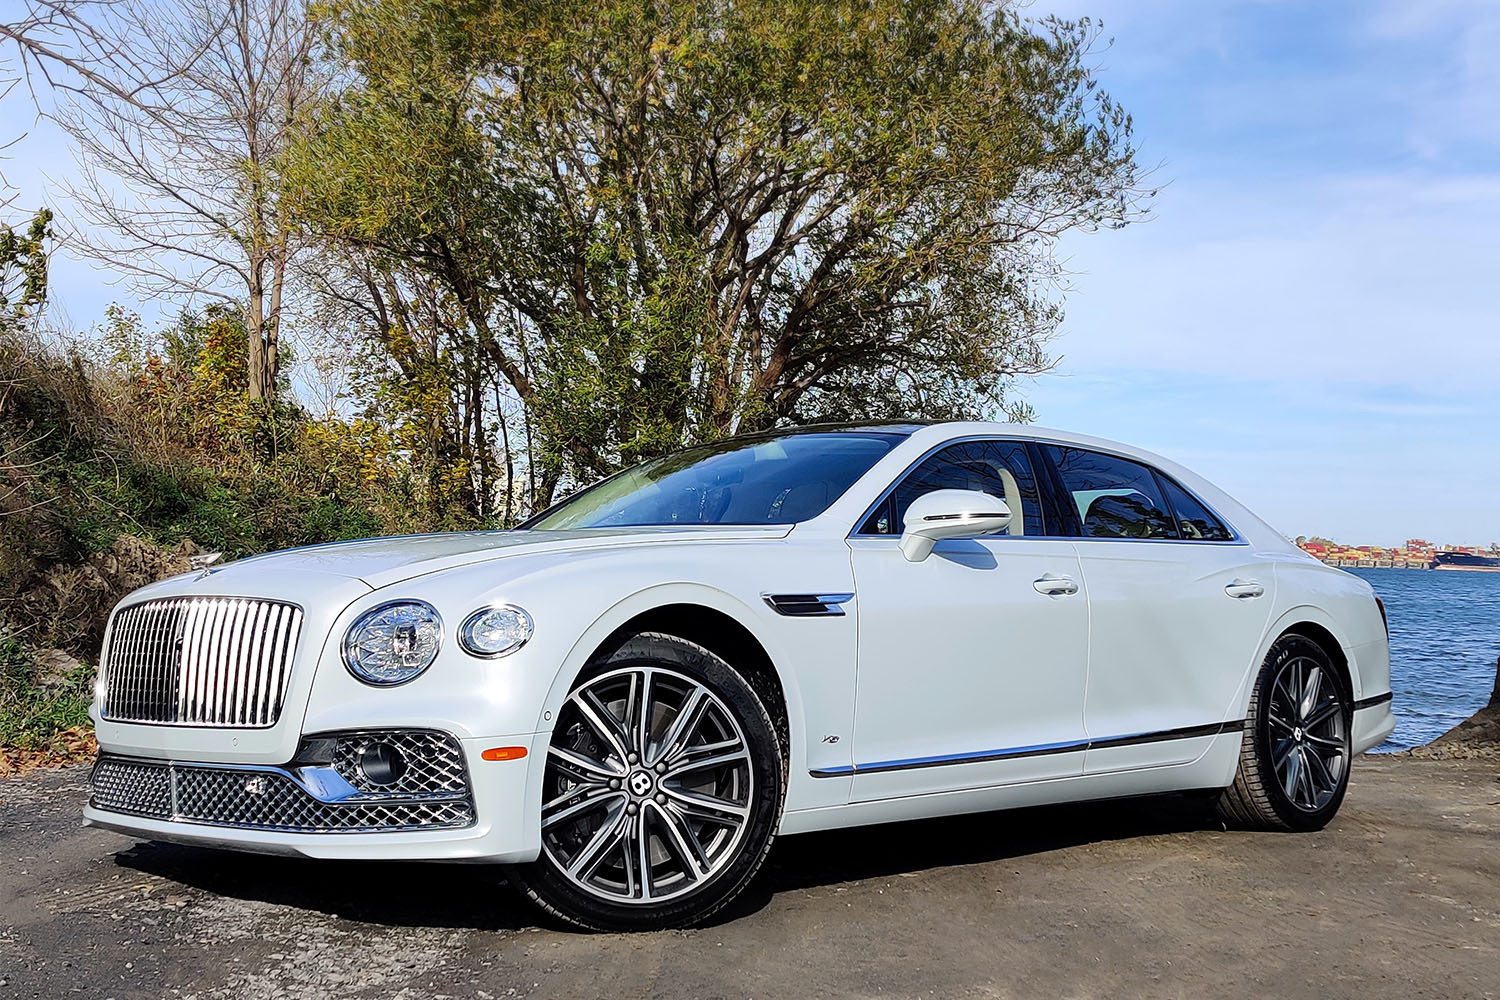 The front third of the 2022 Bentley Flying Spur luxury sedan in white